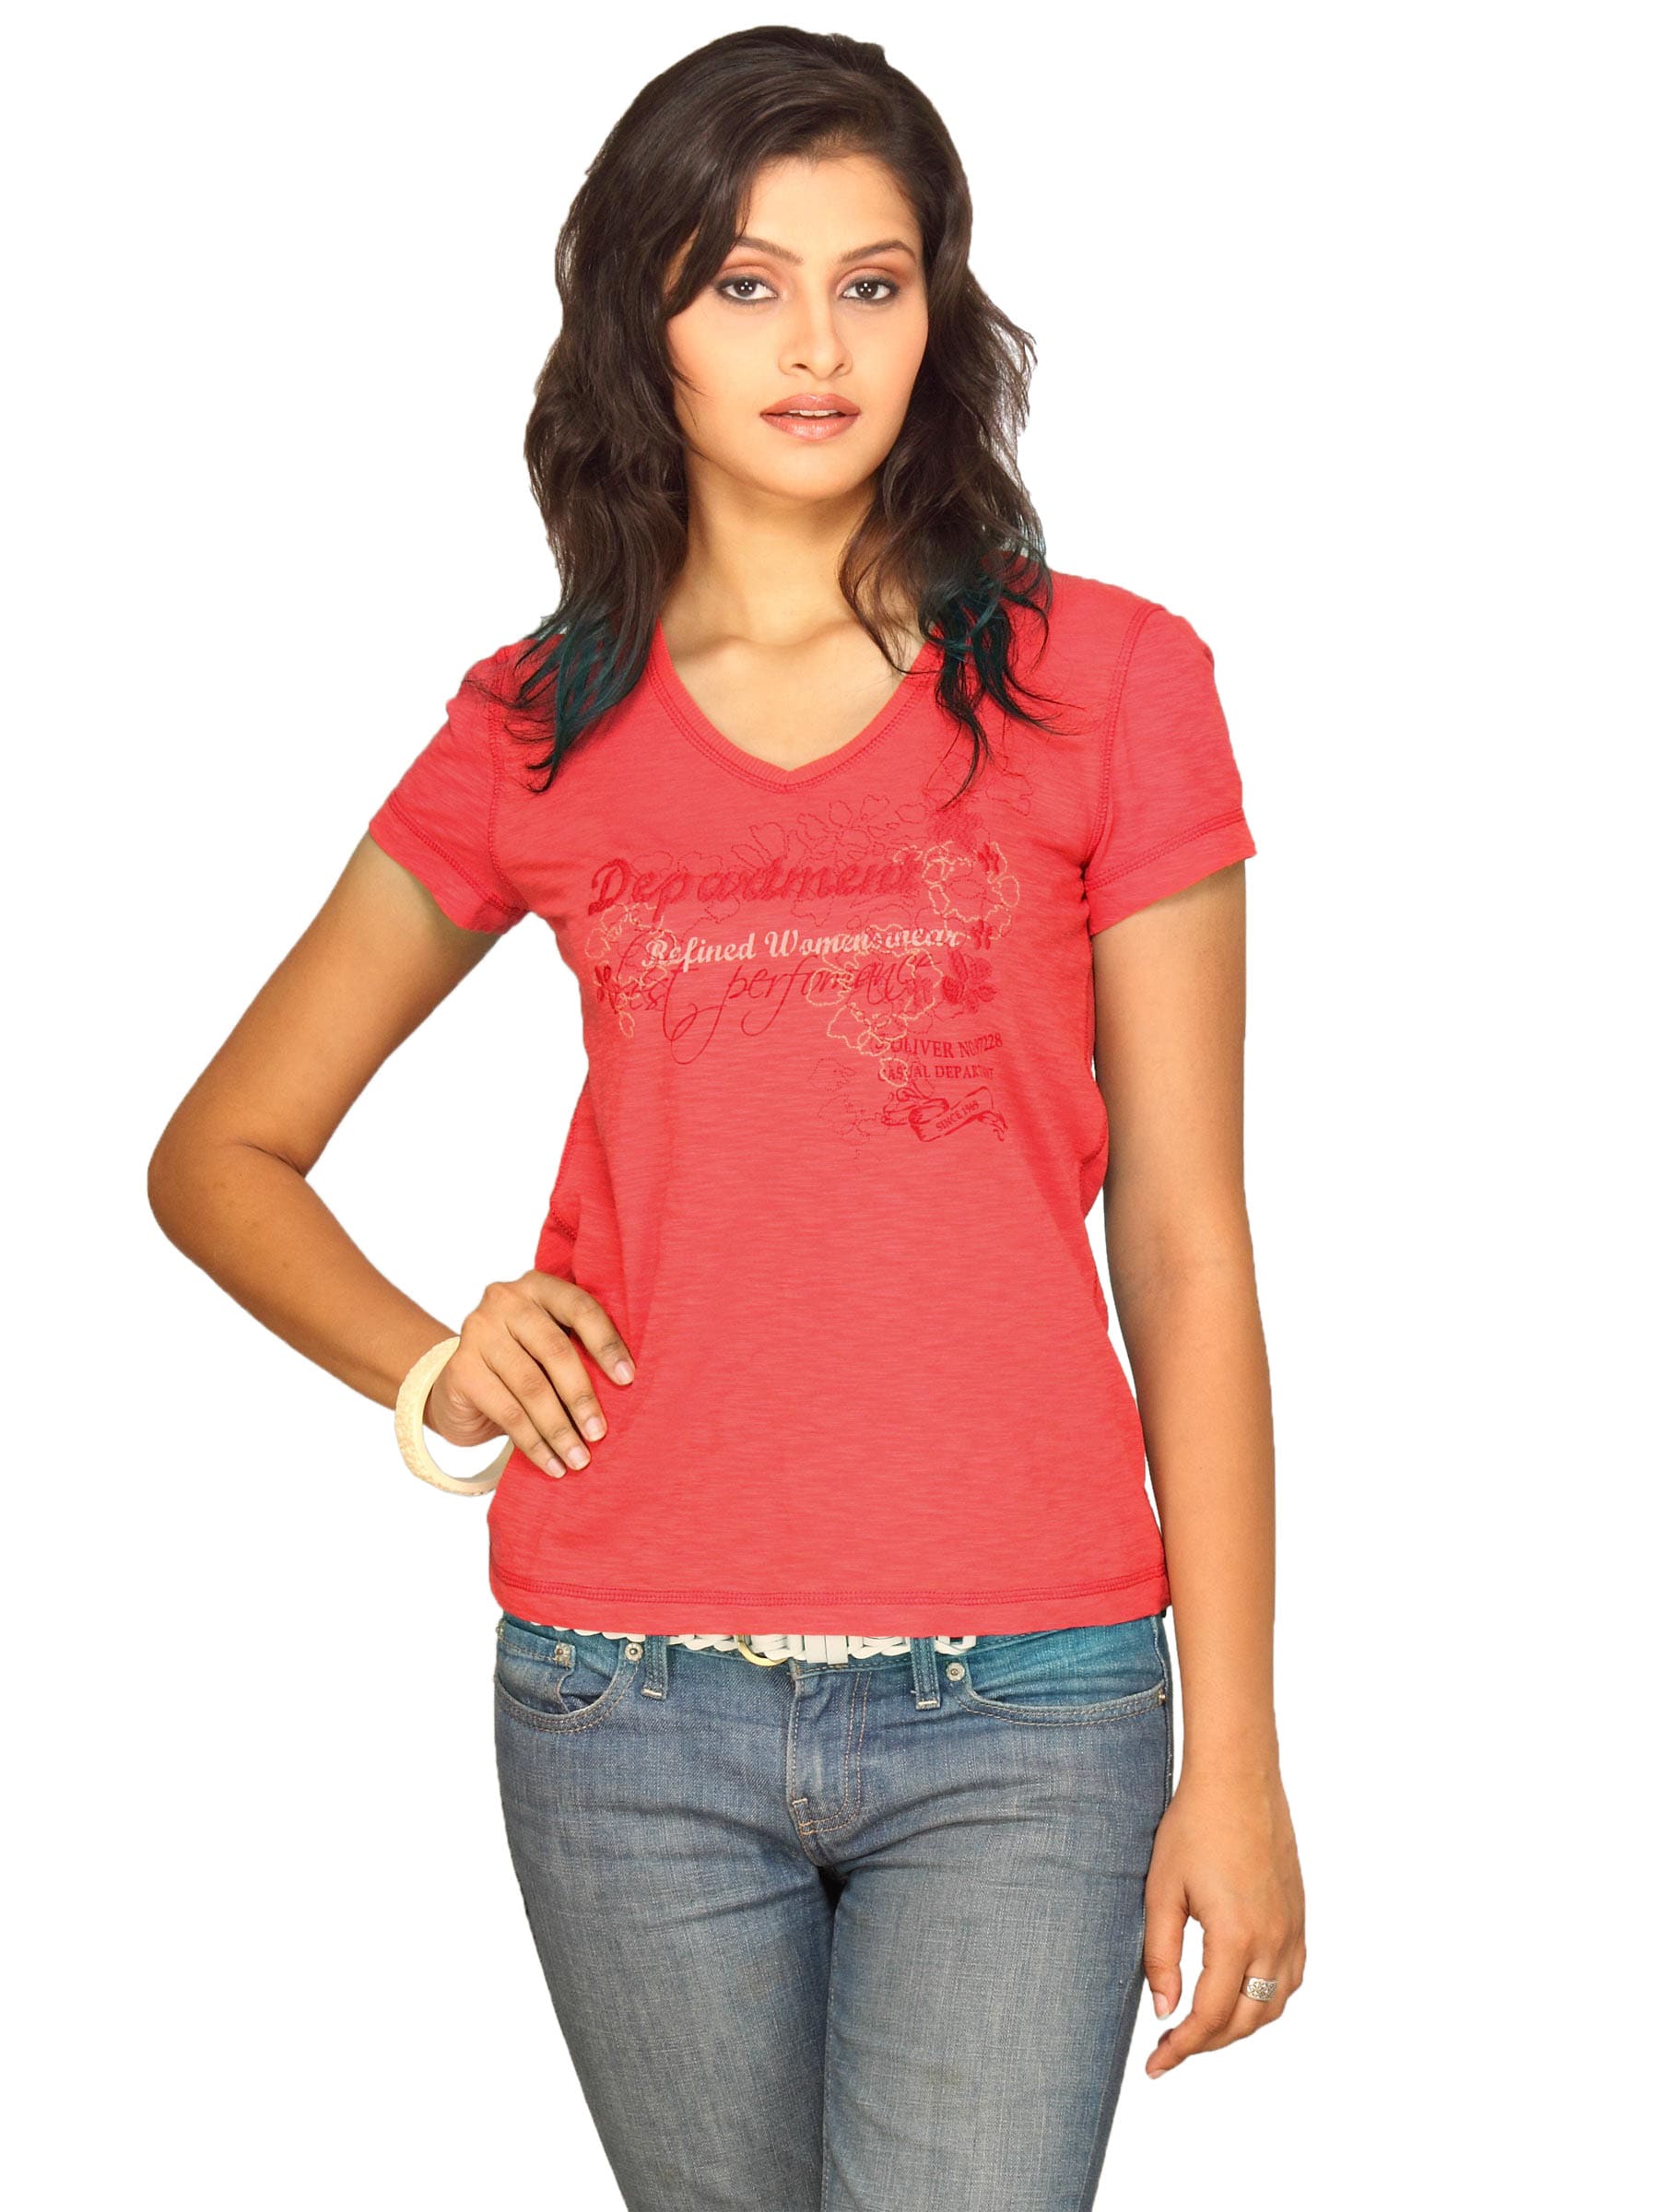 s.Oliver Women's Department Refined Red T-shirt